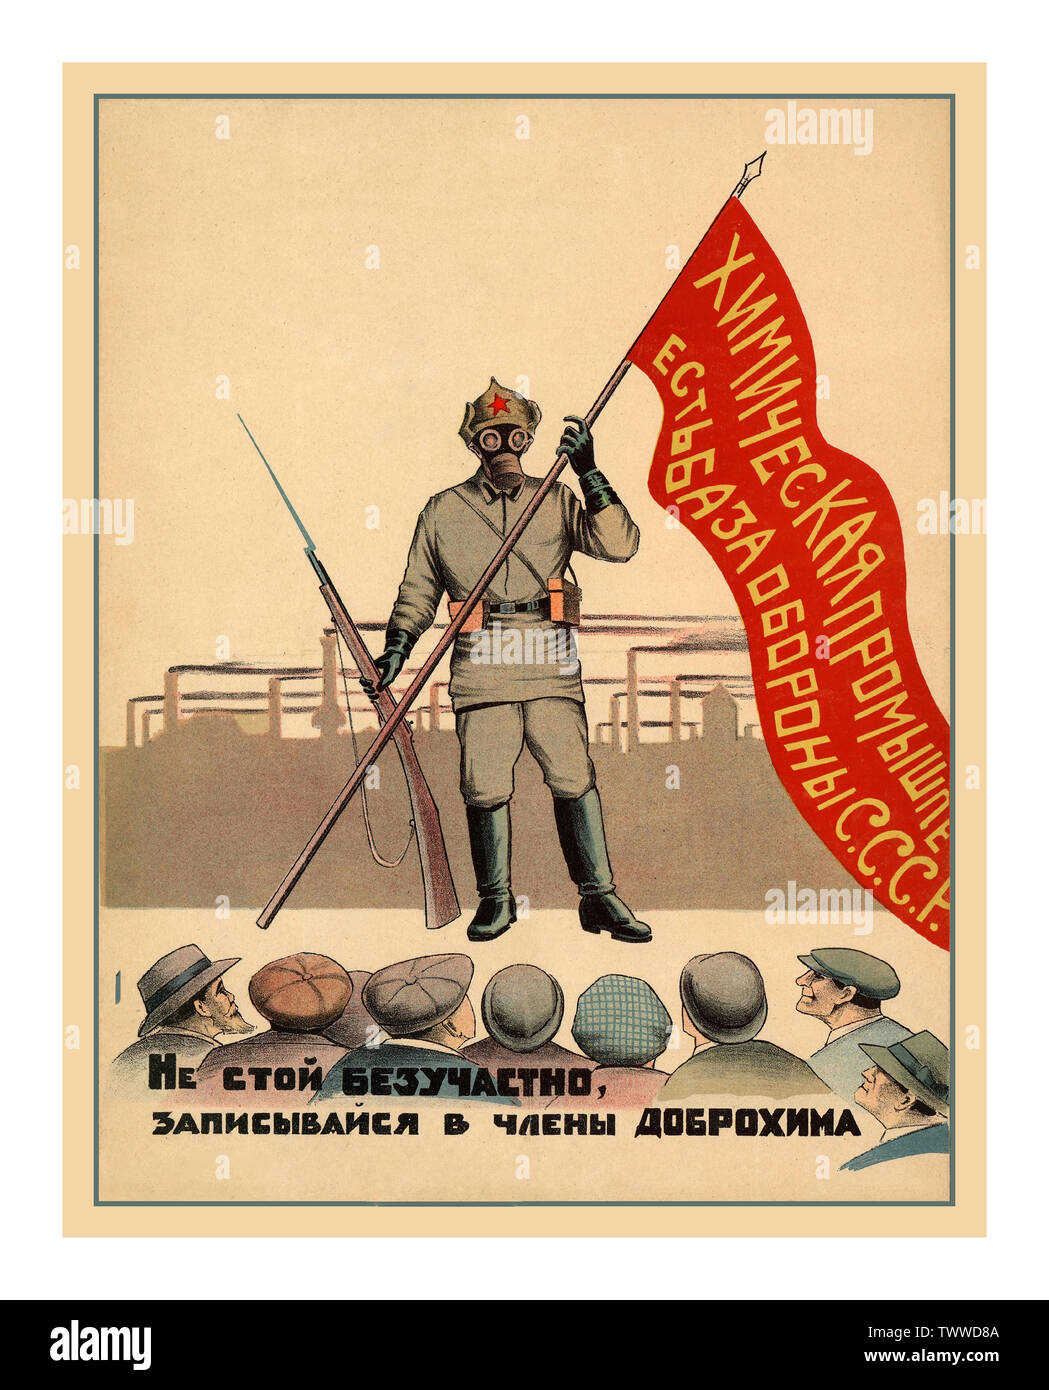 Vintage 1925 Russian Soviet Propaganda Poster for” The chemical warfare industry is the base of the defense of the USSR: Do not stand indifferent, sign up as a member of Dobrokhim” poster 1925 Leningrad Typolithography of the Academy - Color lithograph Stock Photo